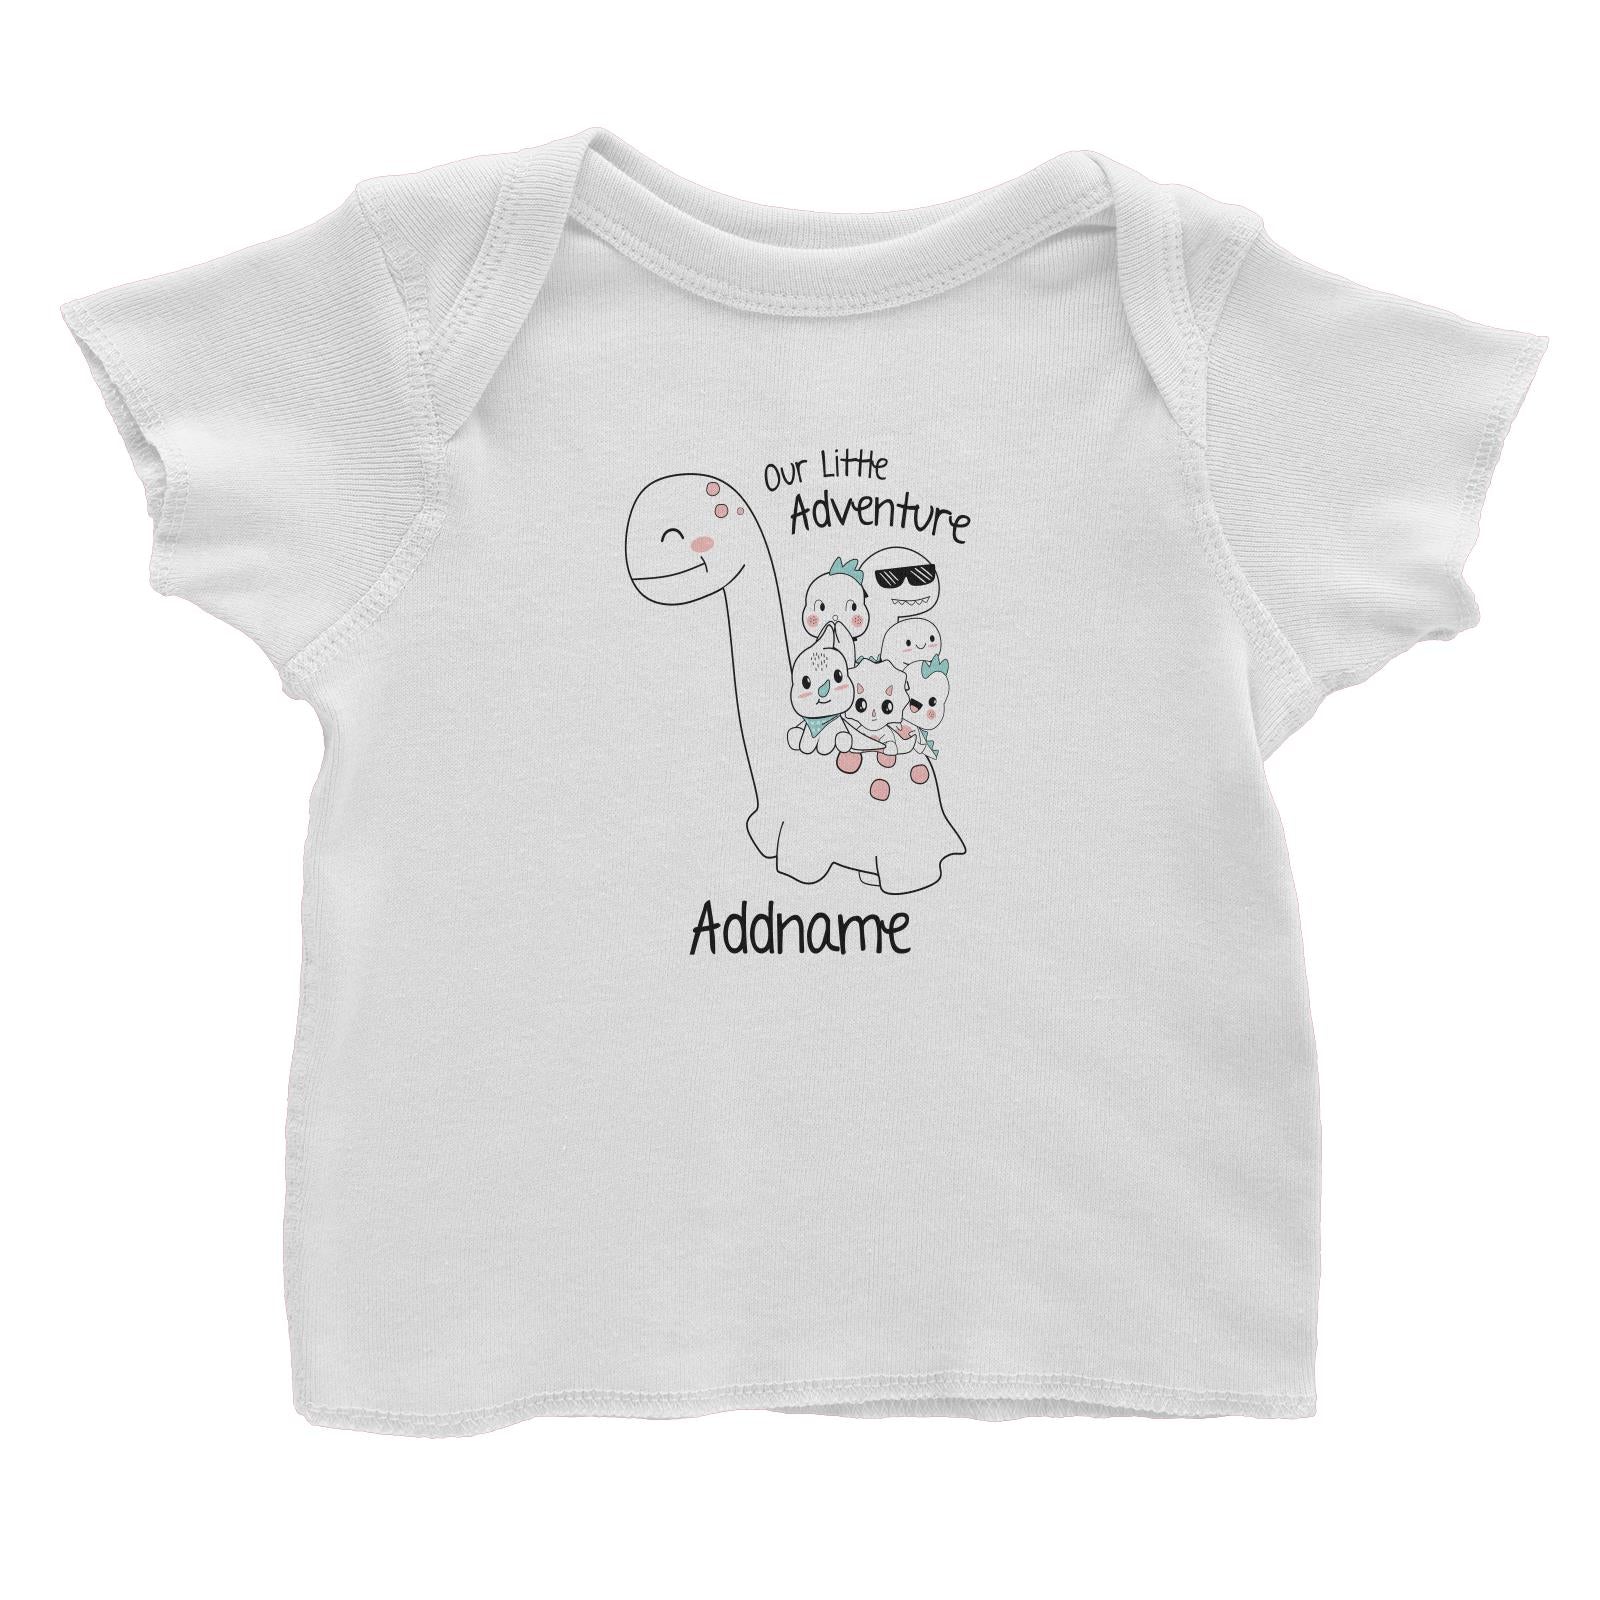 Cute Animals And Friends Series Cute Little Dinosaur Our Little Adventure Addname Baby T-Shirt